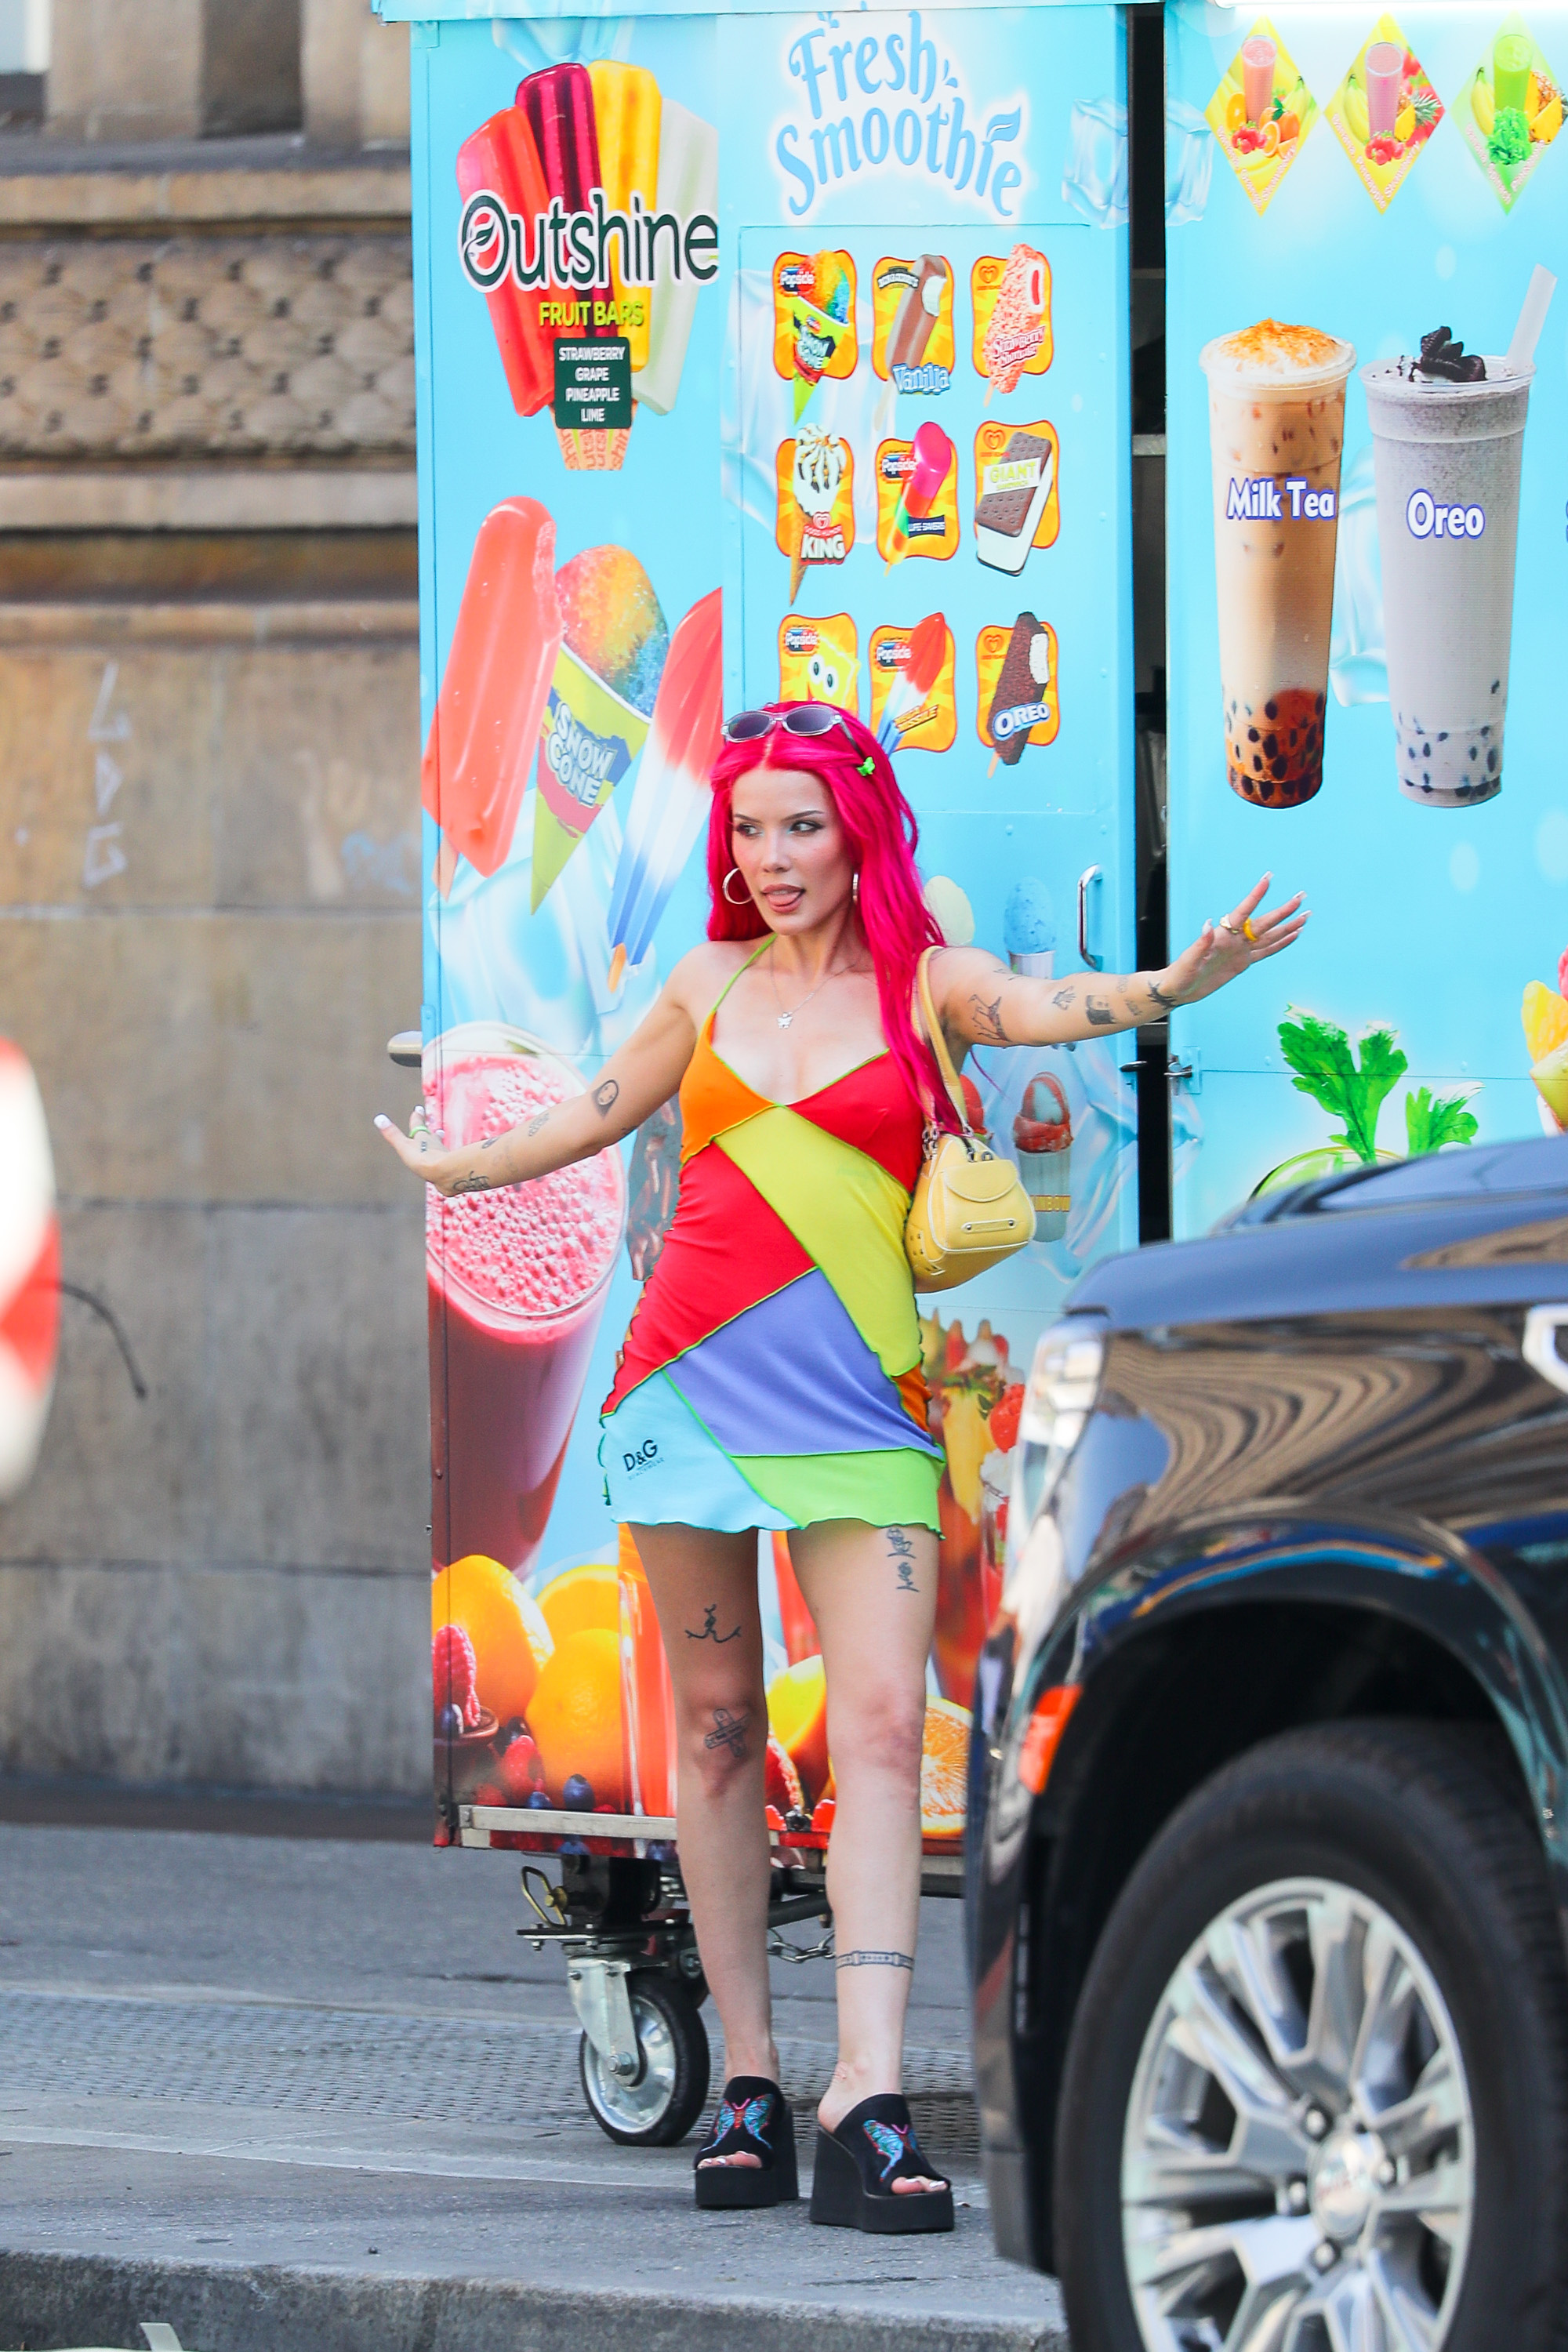 Halsey was seen taking a photo in front of an ice cream truck as she showed off her long pink hair